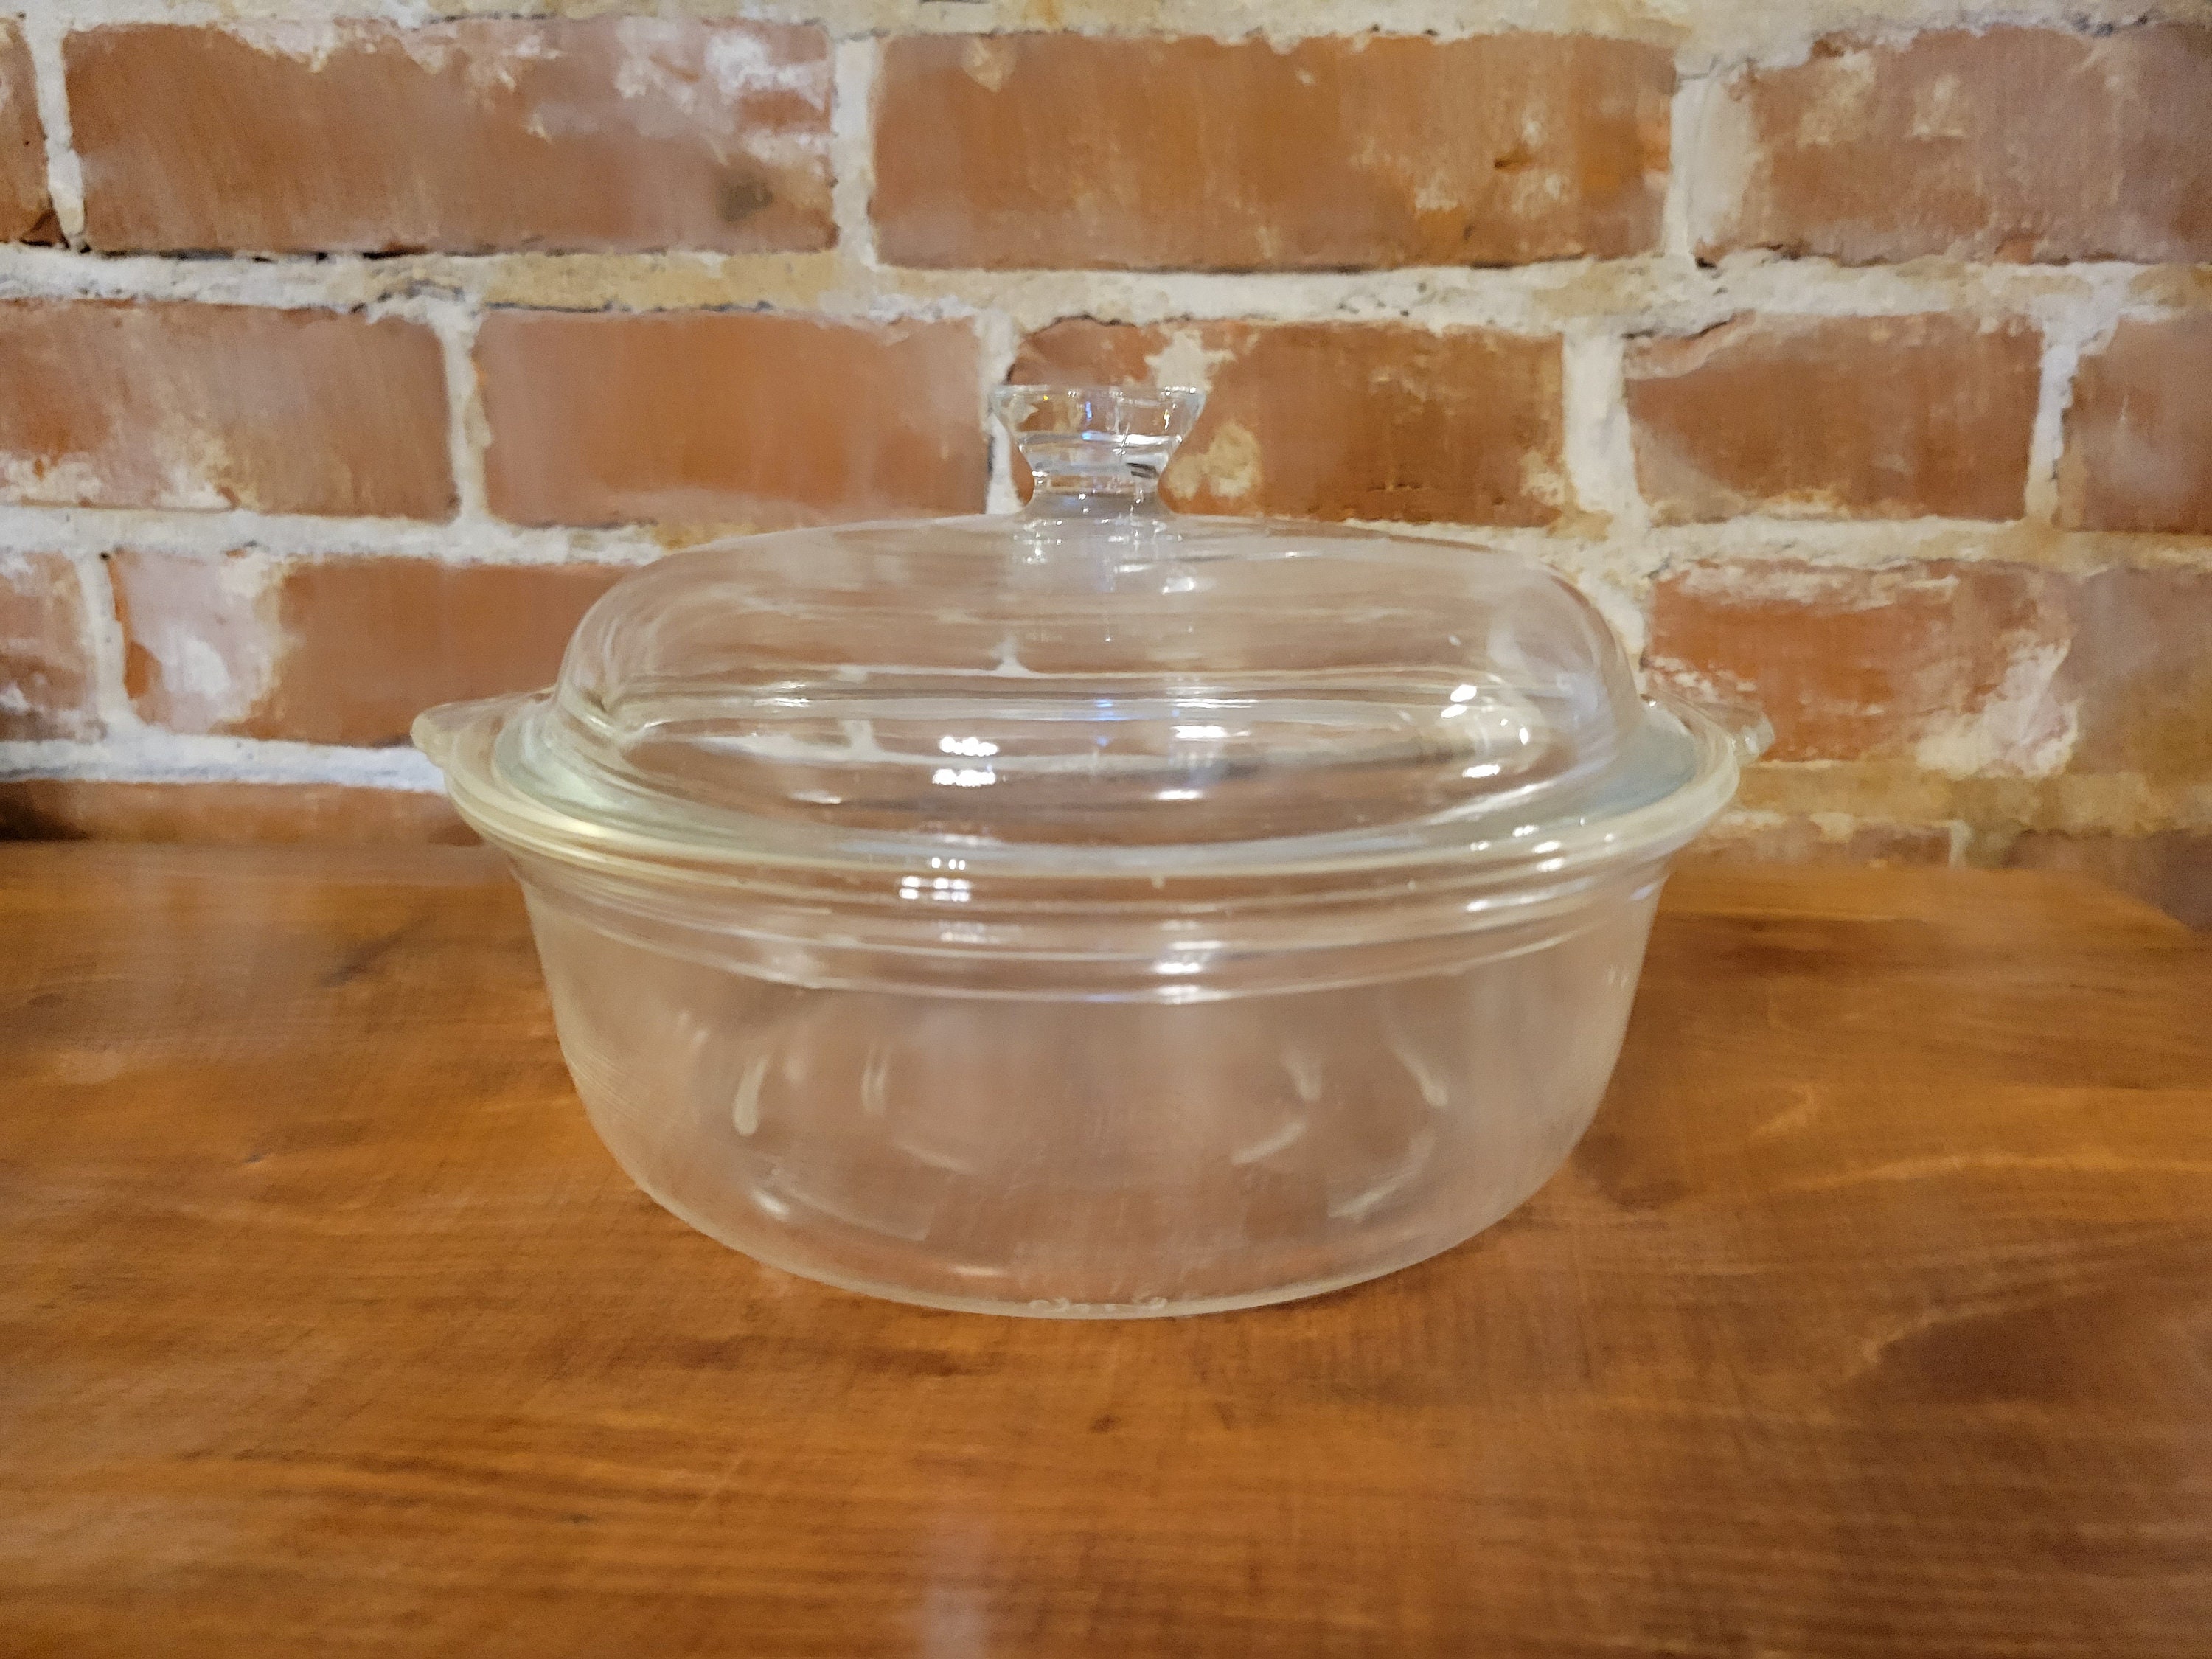 Glasbake D-handle 4 Cup Measuring Cup HTF in Near Perfect Condition for  Farmhouse Vintage Kitchen Decor J-2031 Gift for Baker Cook Collector 